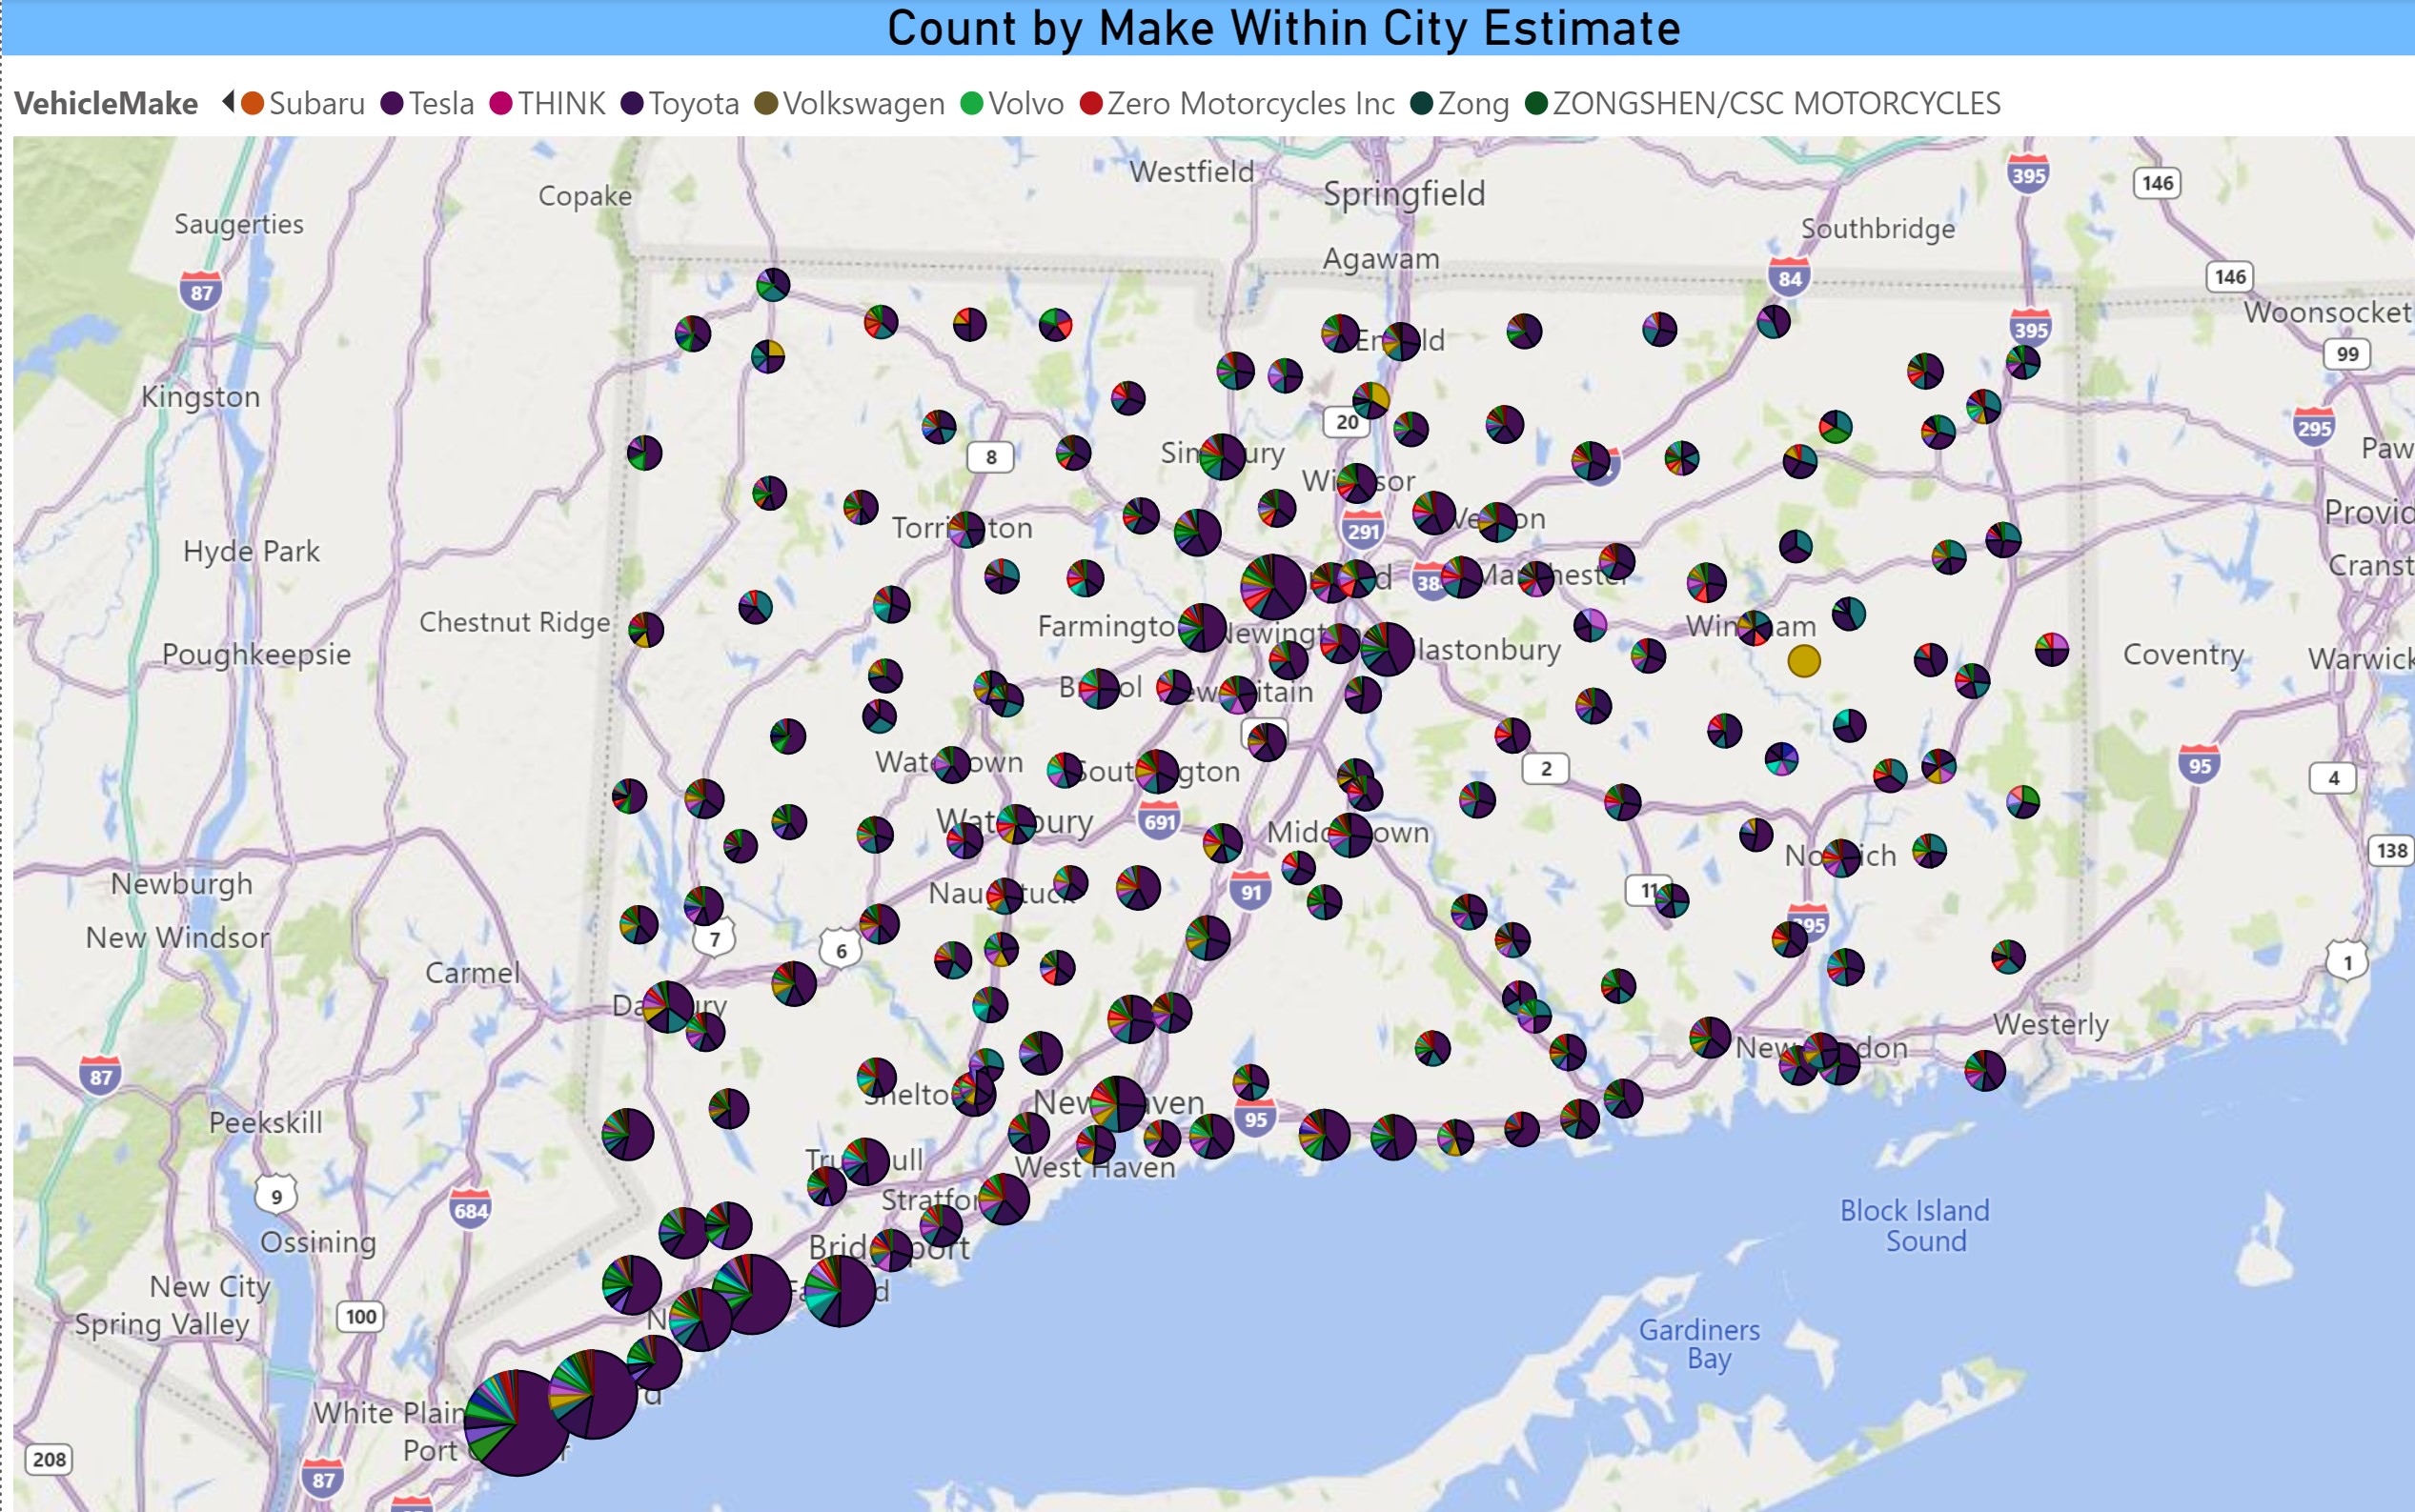 Map of Estimated Count of EV Make by City in CT 1-22